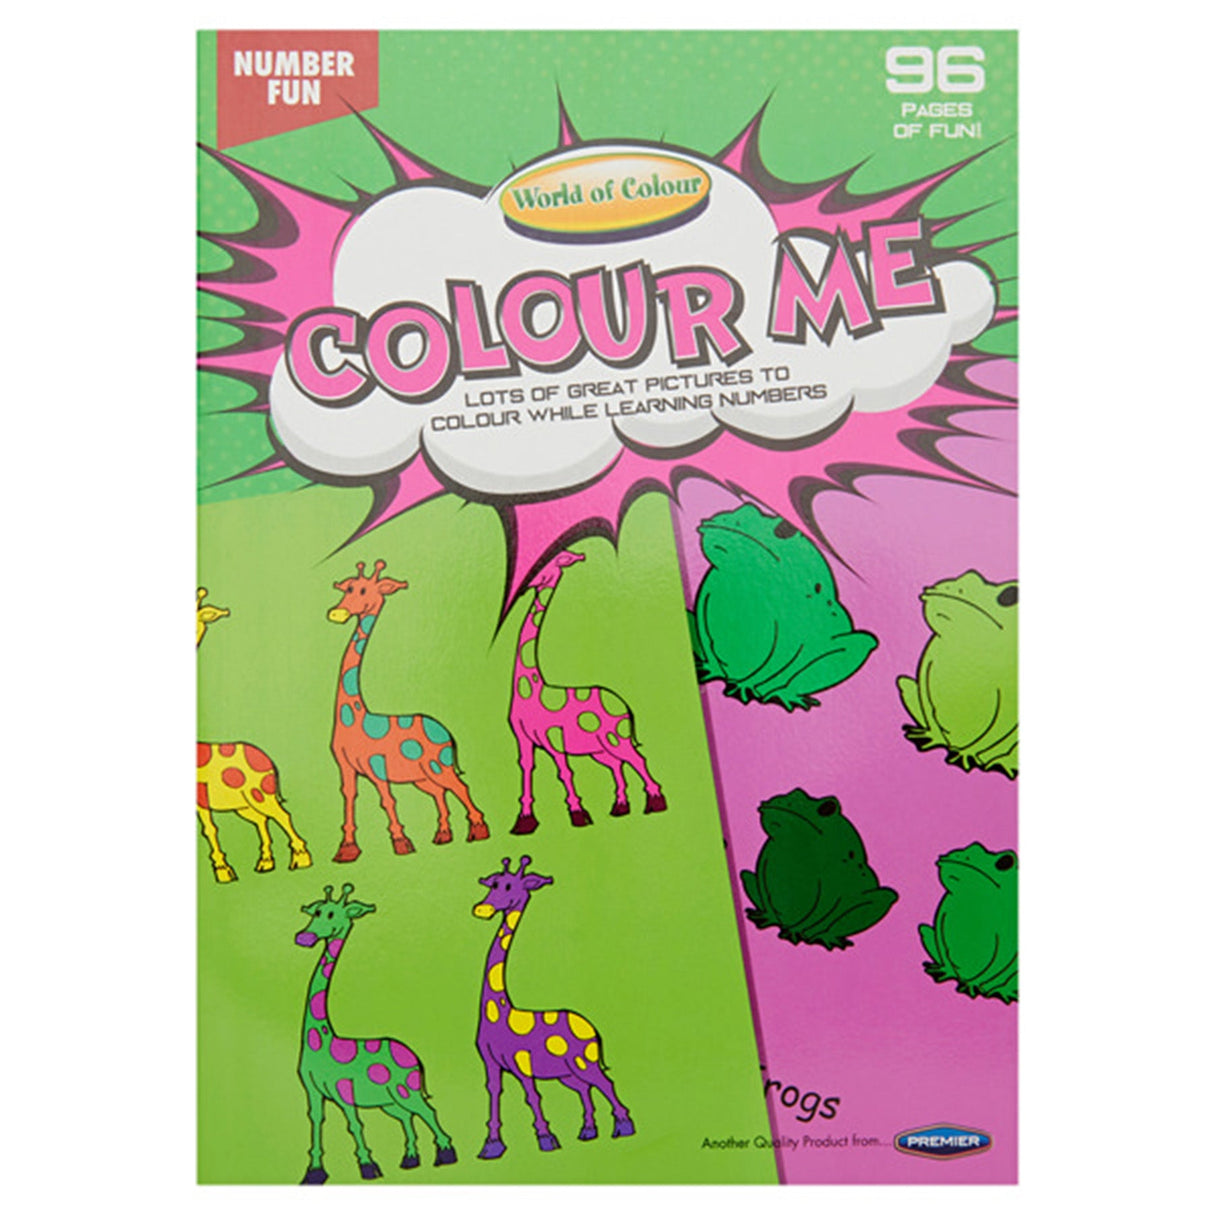 World of Colour A4 Perforated Colour Me Colouring Book - 96 Pages - Number Fun-Kids Colouring Books-World of Colour|StationeryShop.co.uk